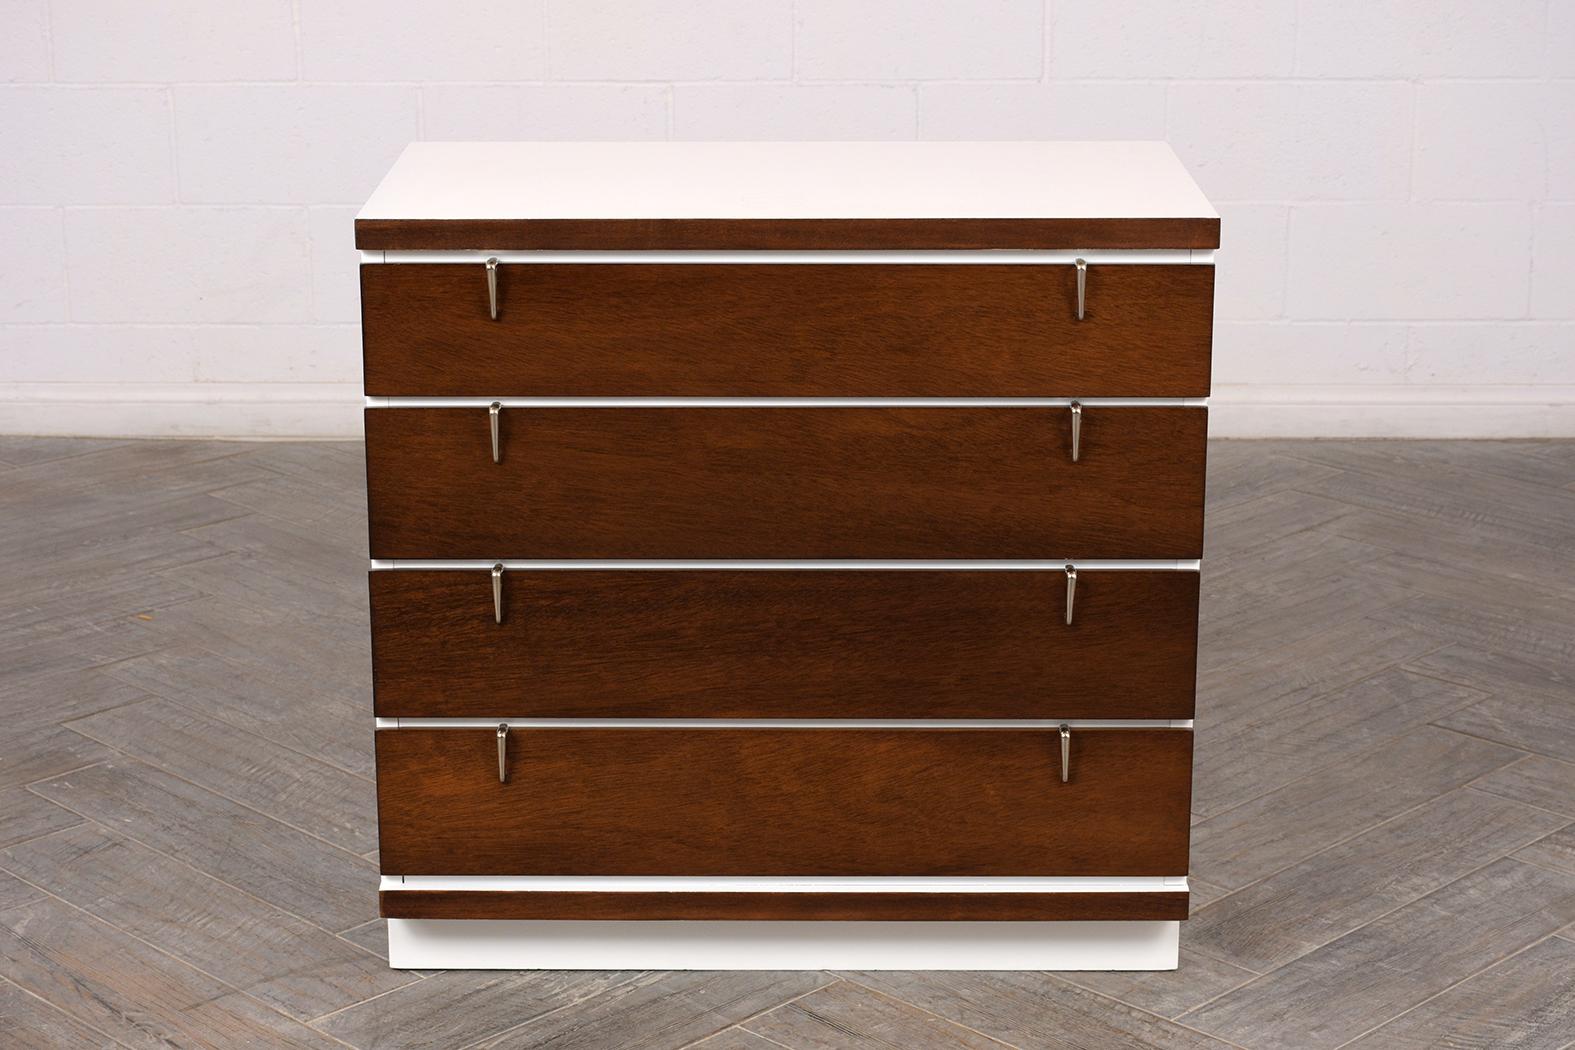 This set of mid-century chests of drawers is completely restored by our team of craftsmen and is newly stained in dark walnut & white color combination with a lacquered finish. These dressers come with four large drawers with chrome pulls and rests